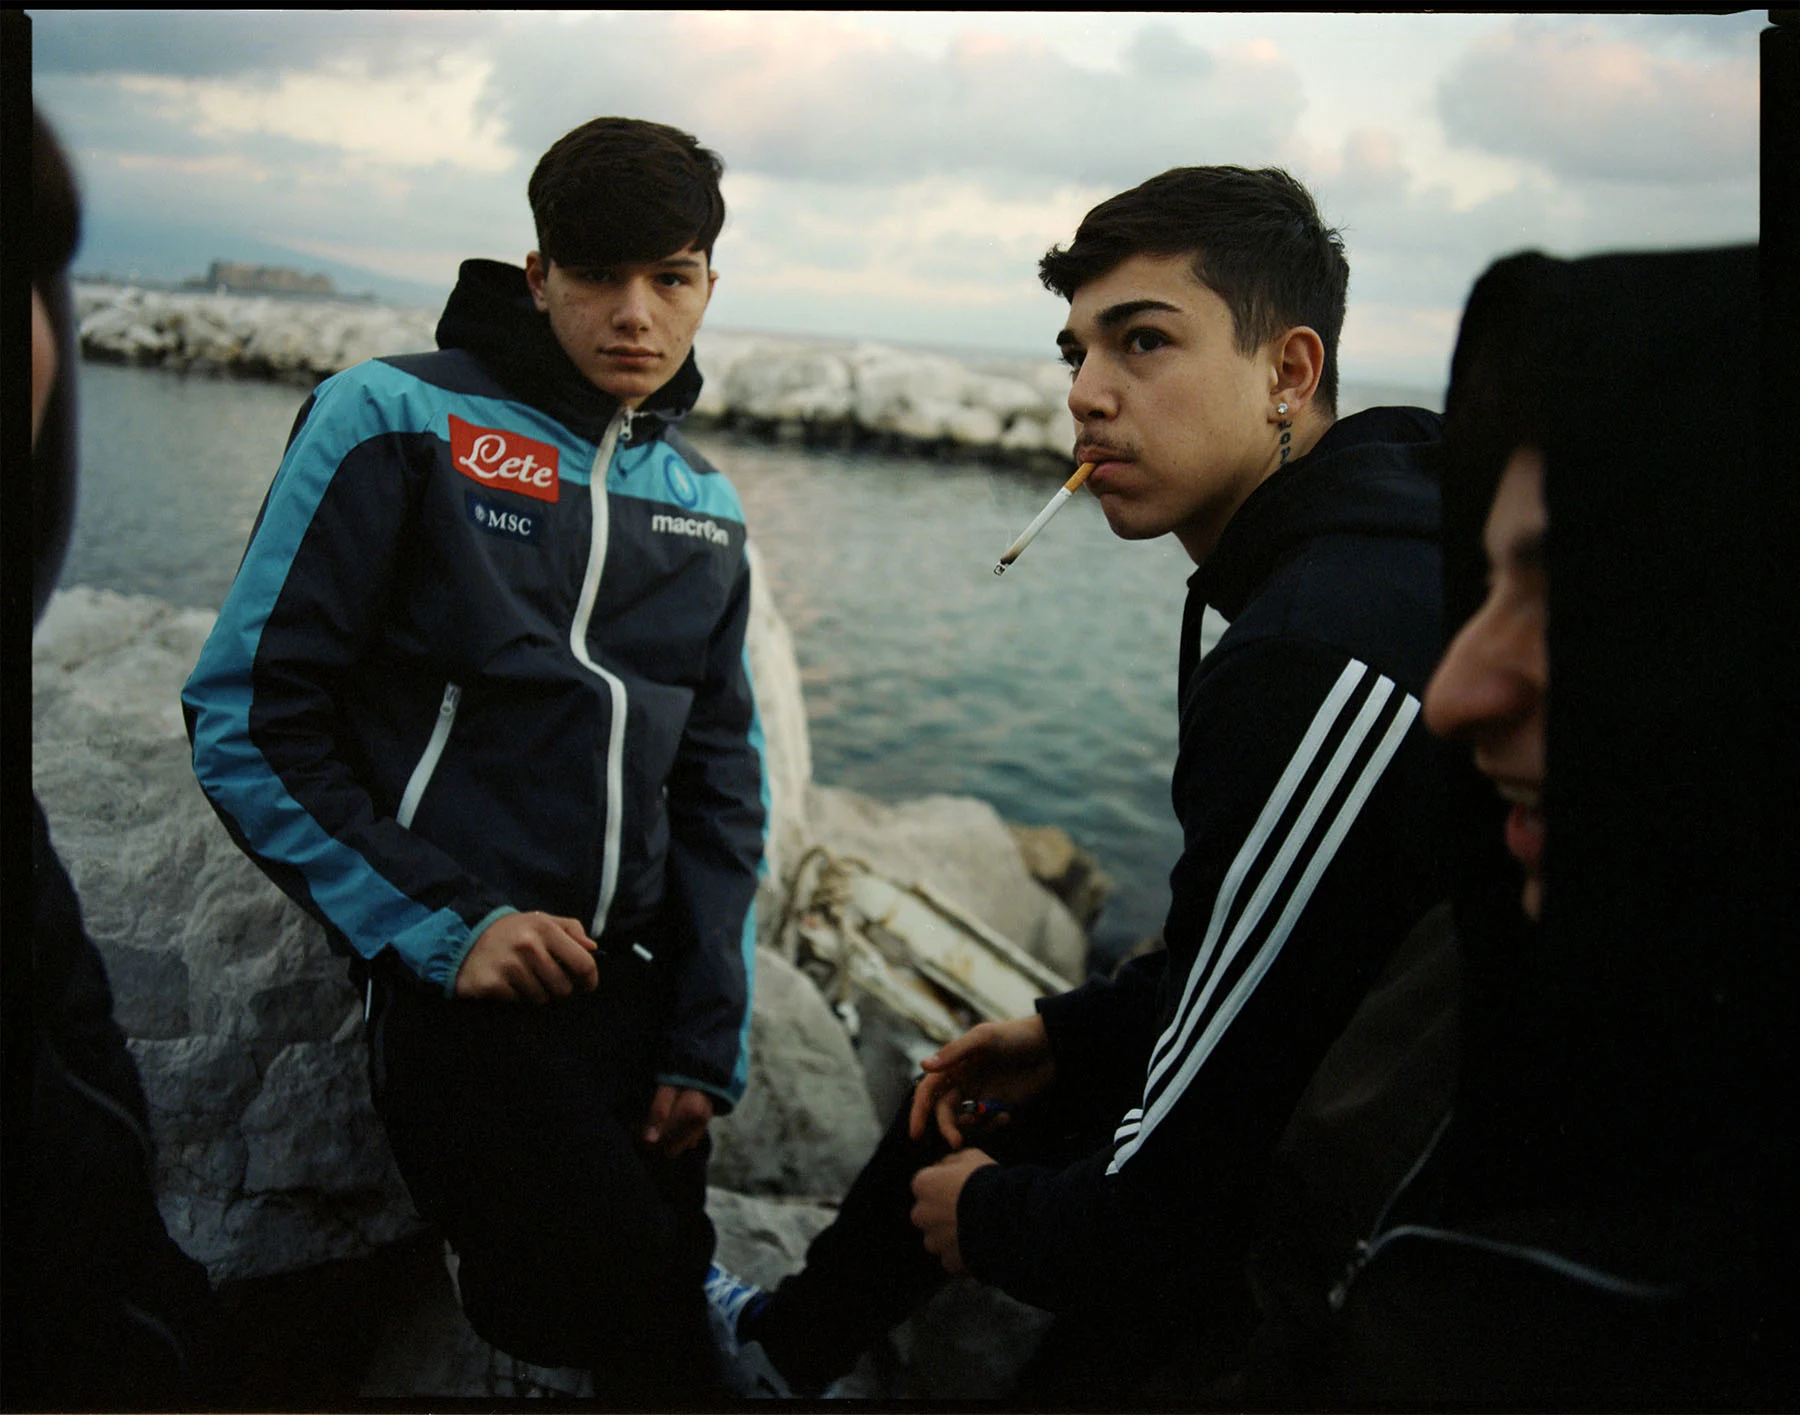 A photo of a group of teenage Neapolitan boys hanging out by the sea, a cigarette hanging from one of their mouths